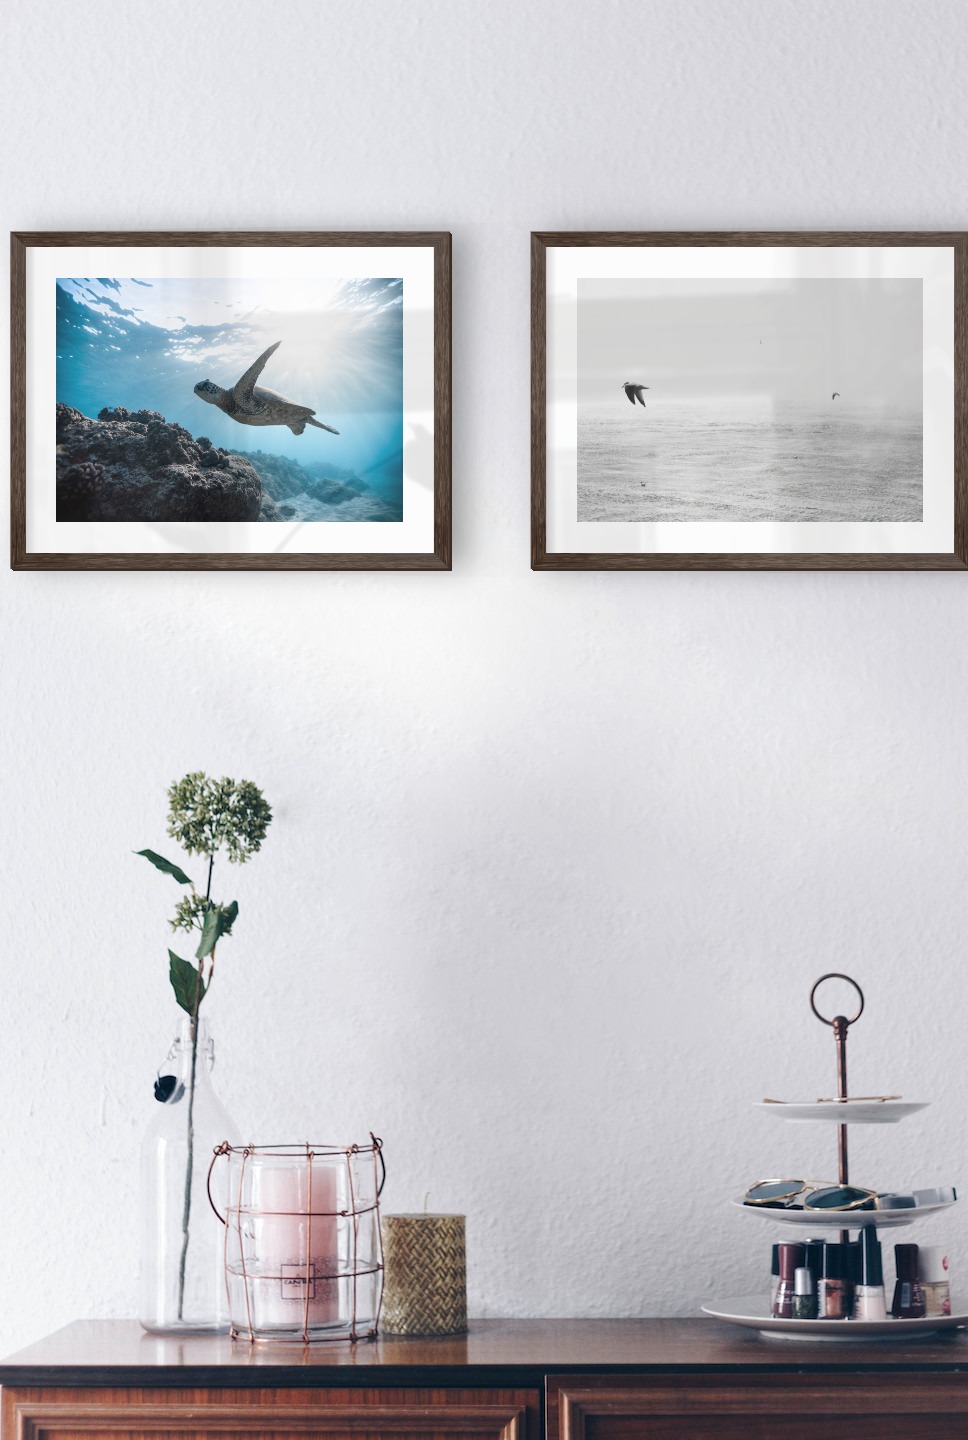 Gallery wall with picture frames in dark wood in sizes 30x40 with prints "Turtle in the water" and "Birds over the sea"